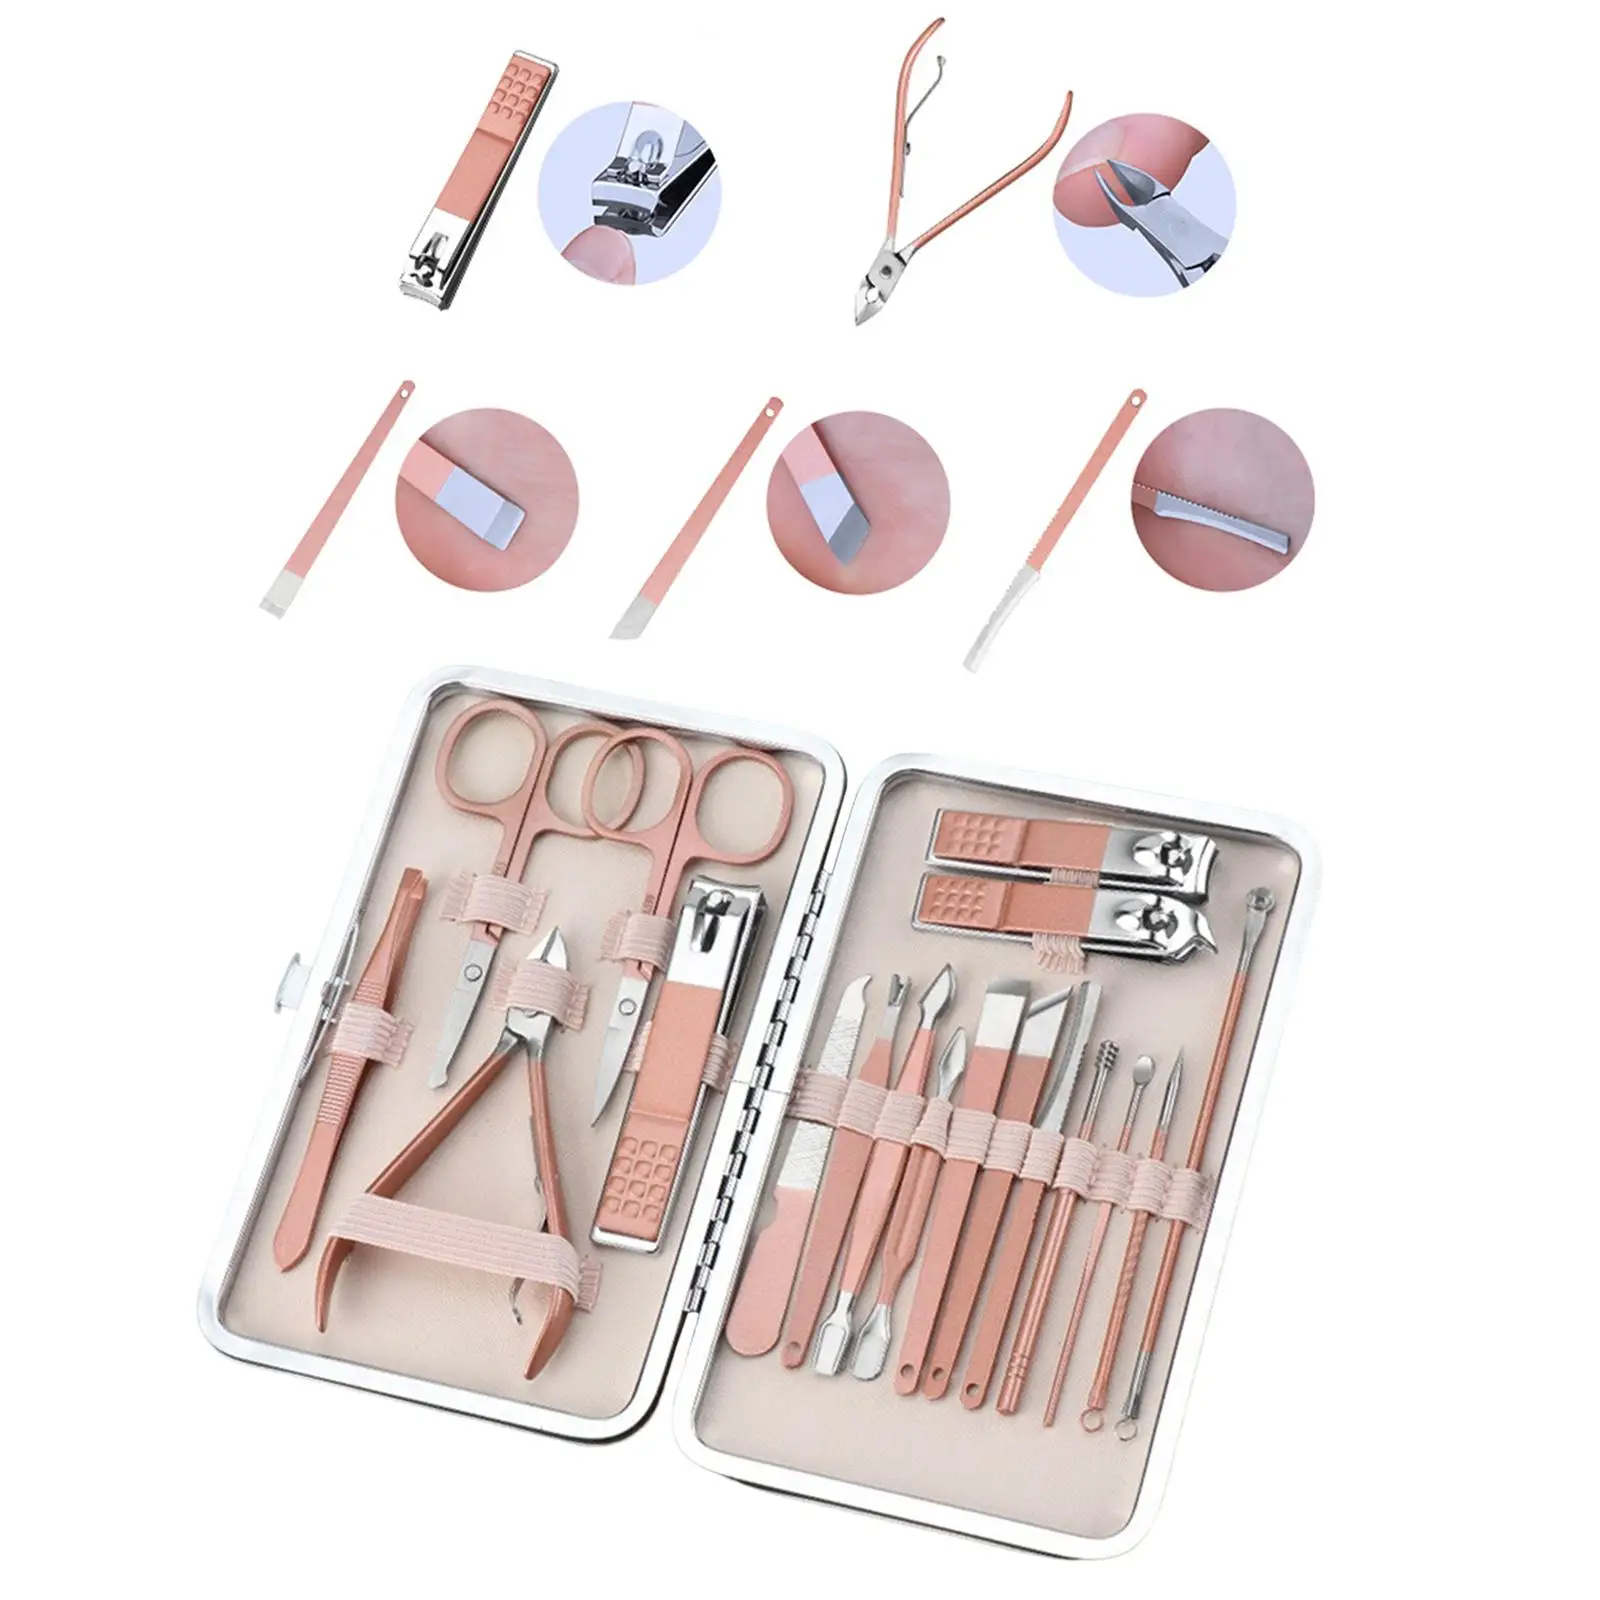 Groomings Multipurpose Durable with Case Portable Stainless Steel professional Set for Parents Beauty Salon Women Home Gift